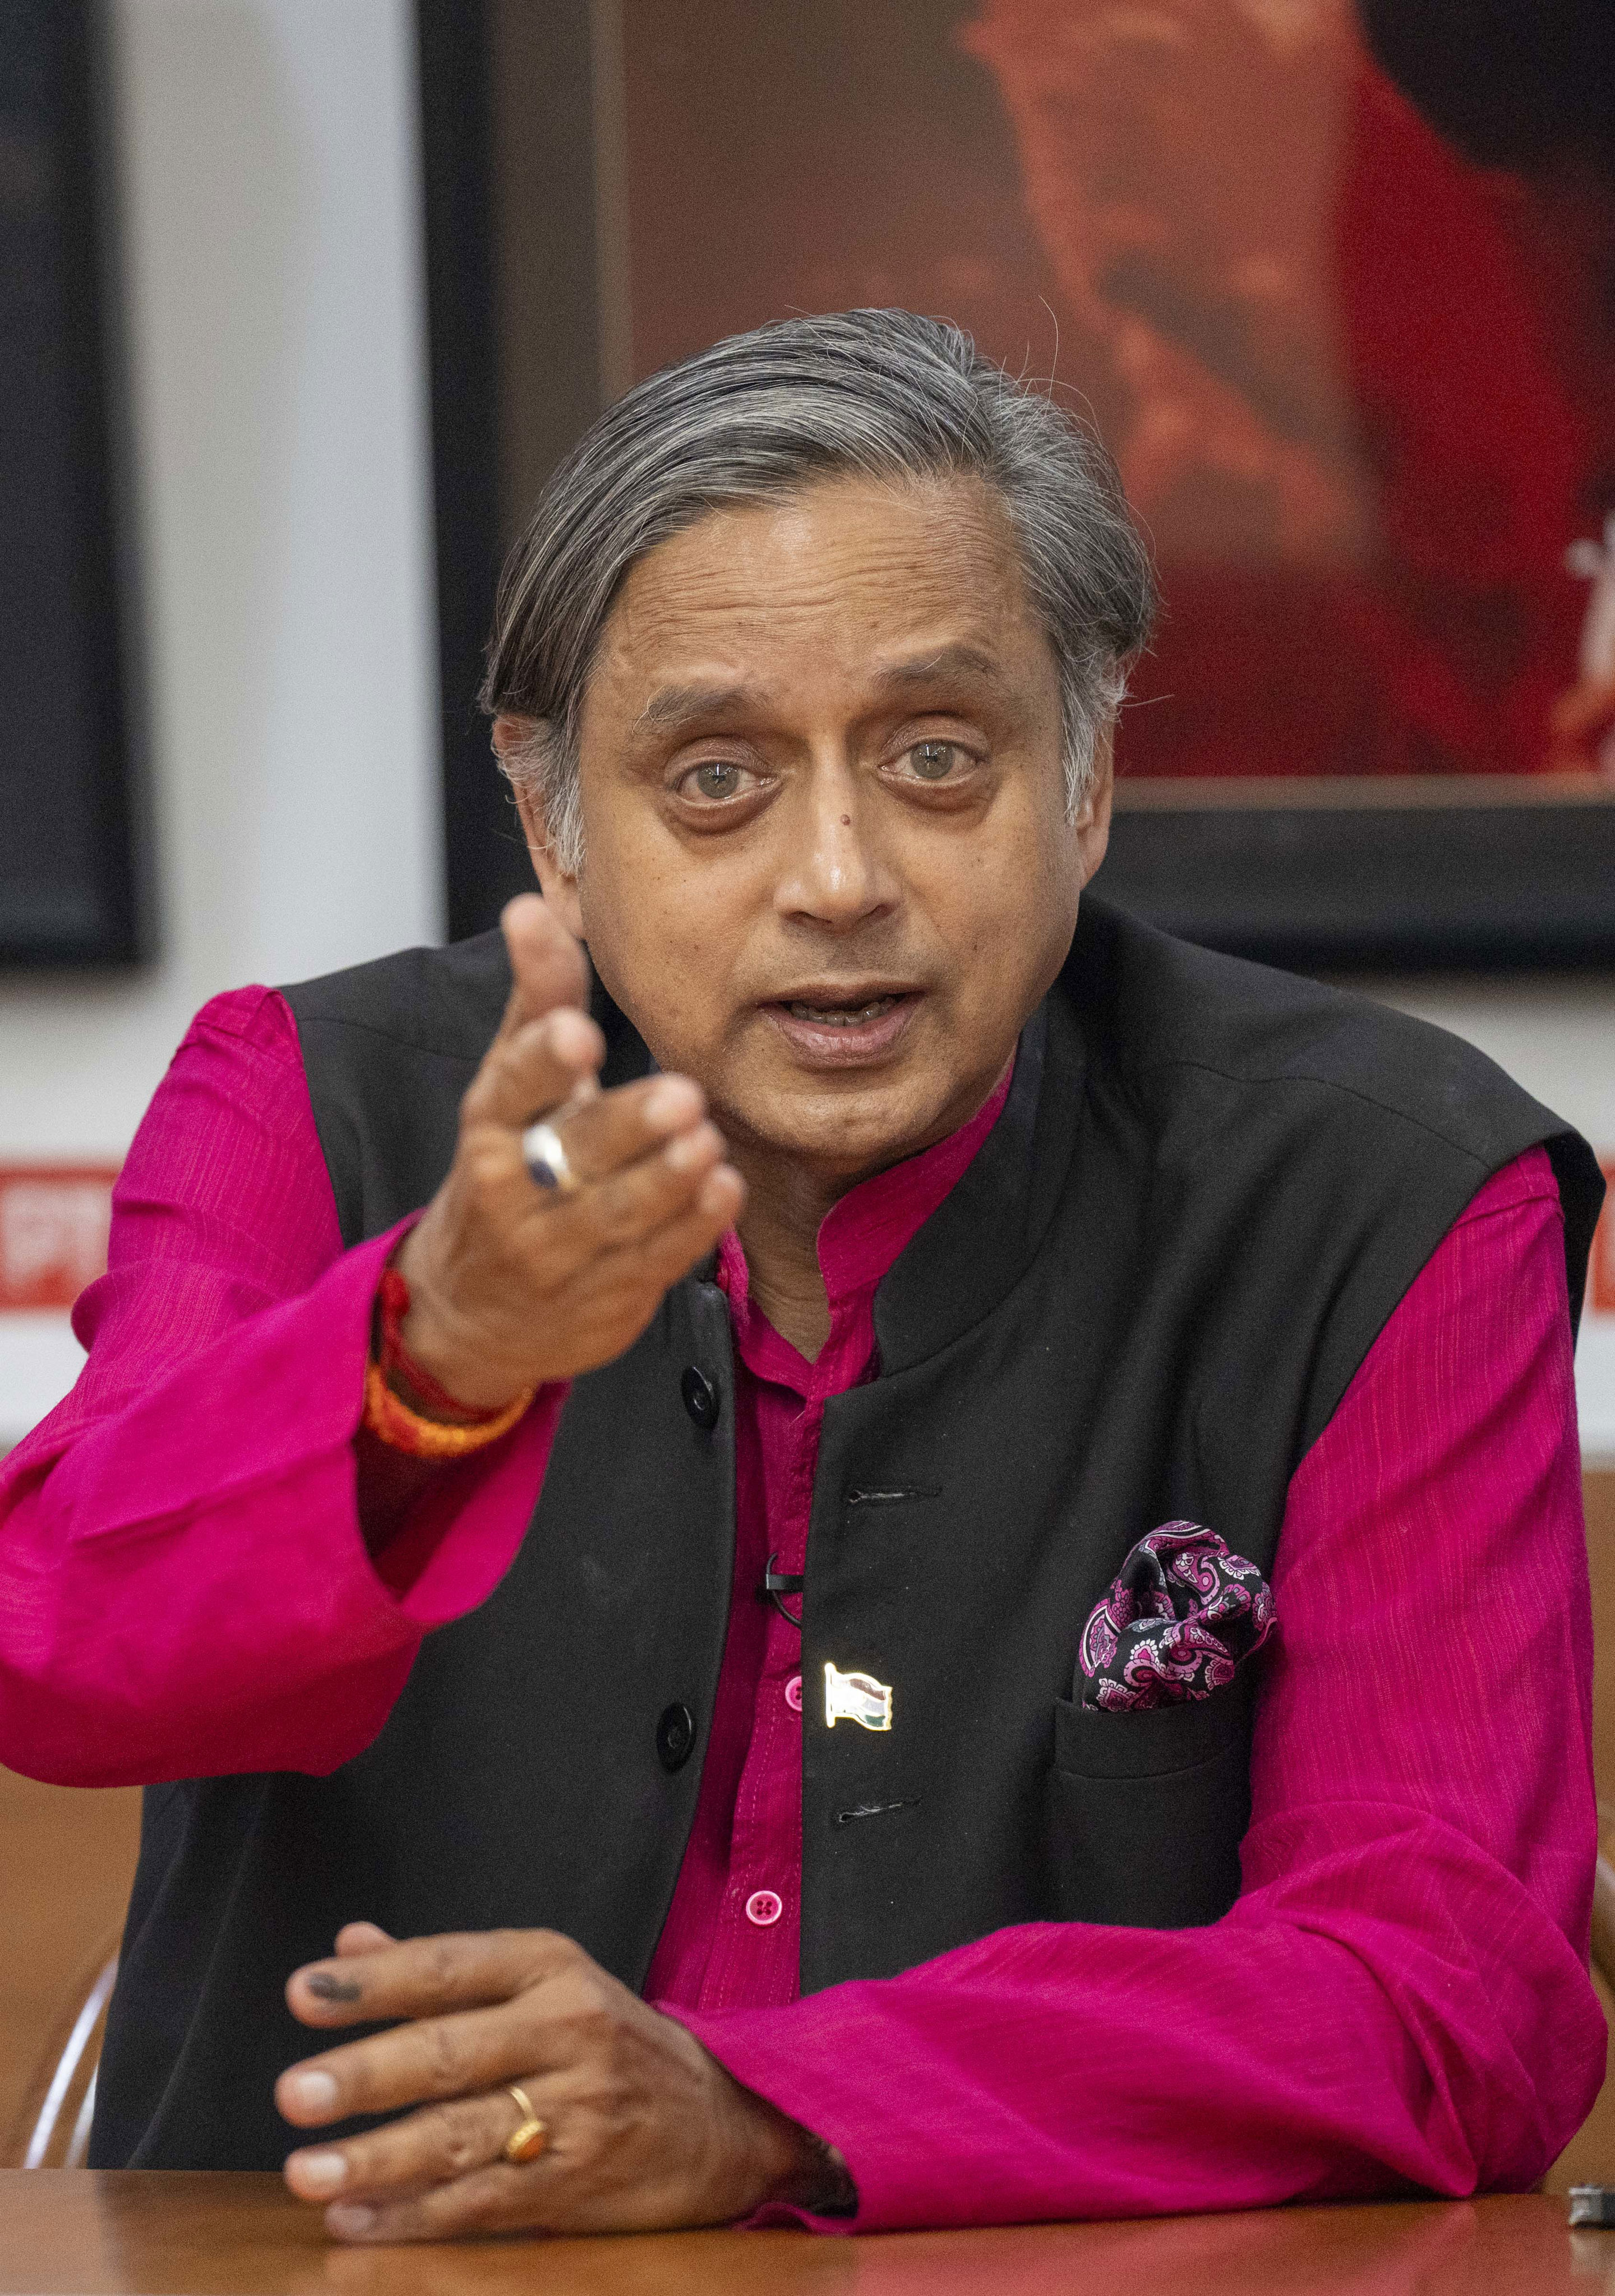 india bloc pm will be first among equals, all oppn parties will join hands after polls: shashi tharoor